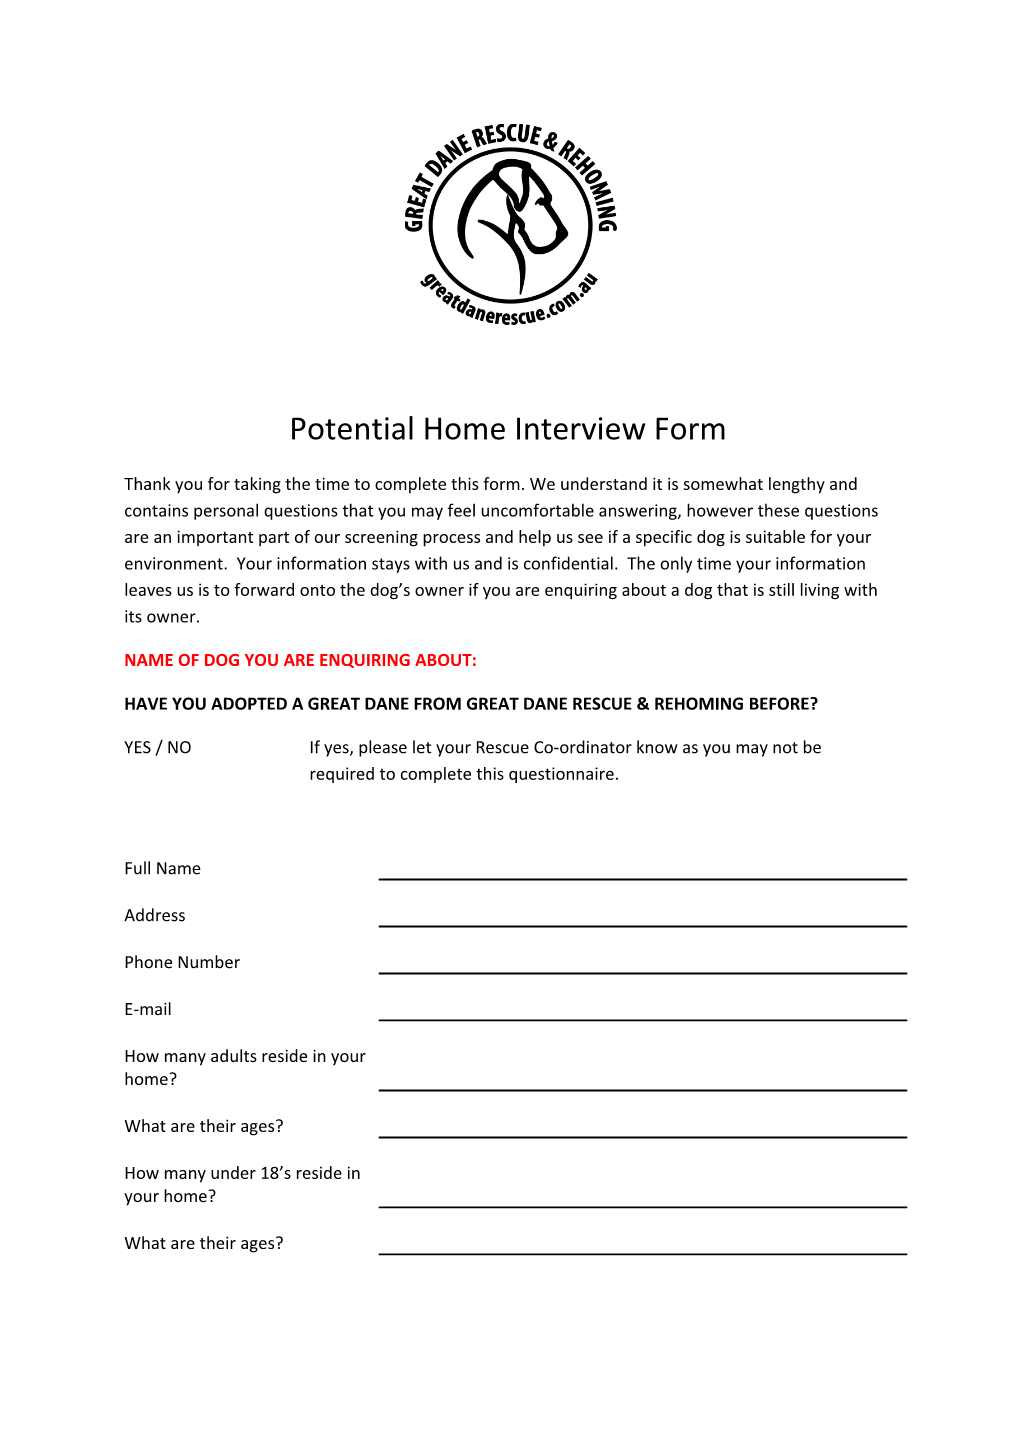 Potential Home Interview Form